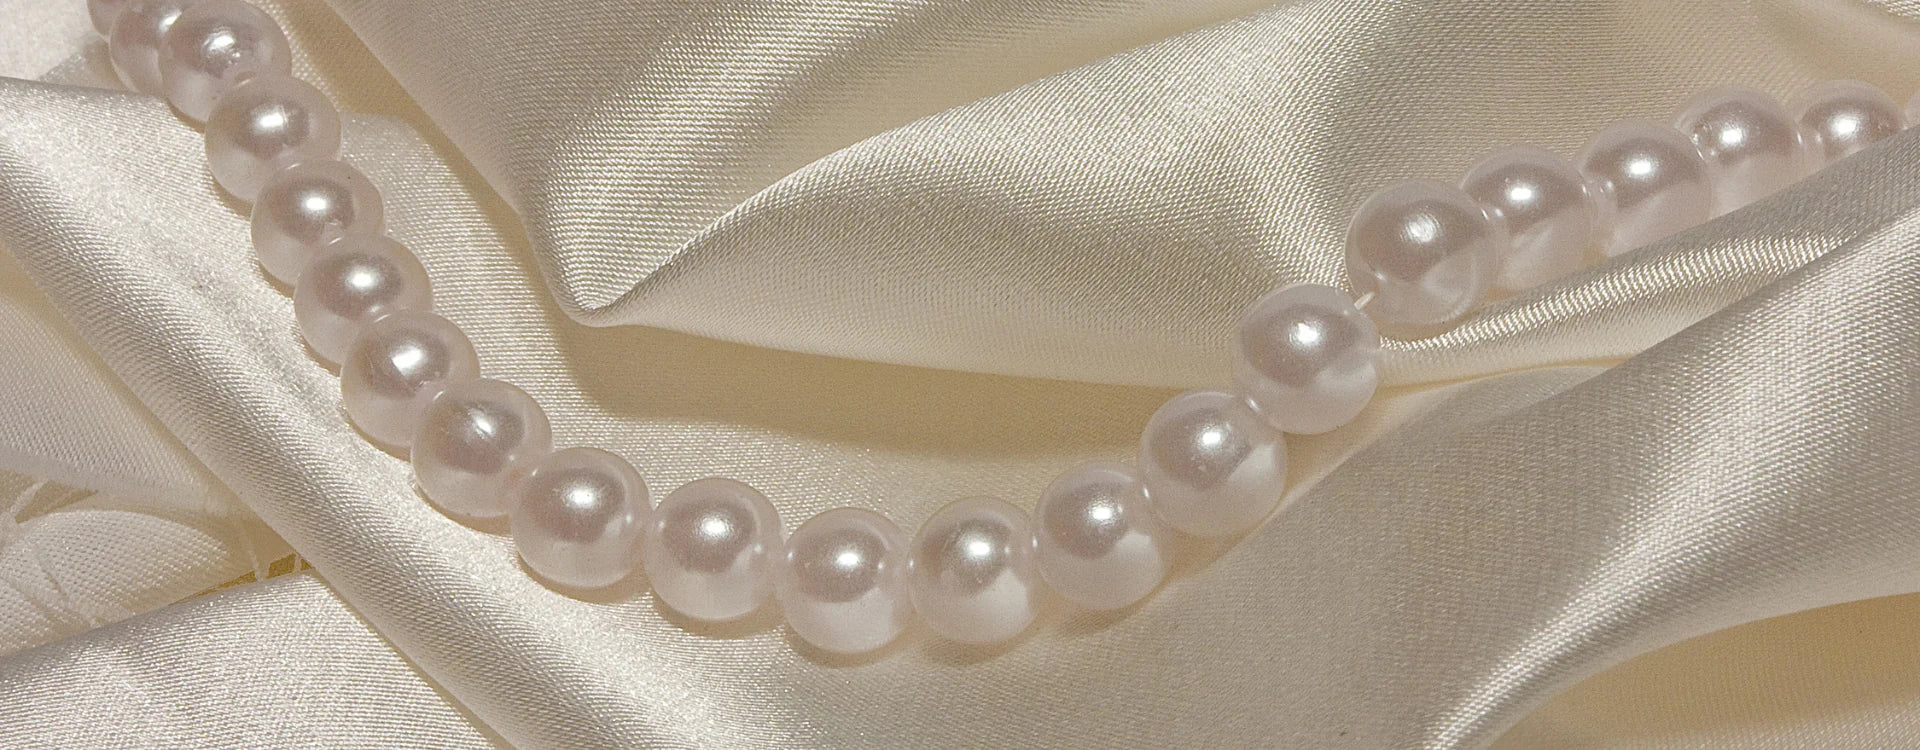 Pearl Jewelry | Mother of Pearl Jewelry | Baroque Pearl Jewelry | Selenichast